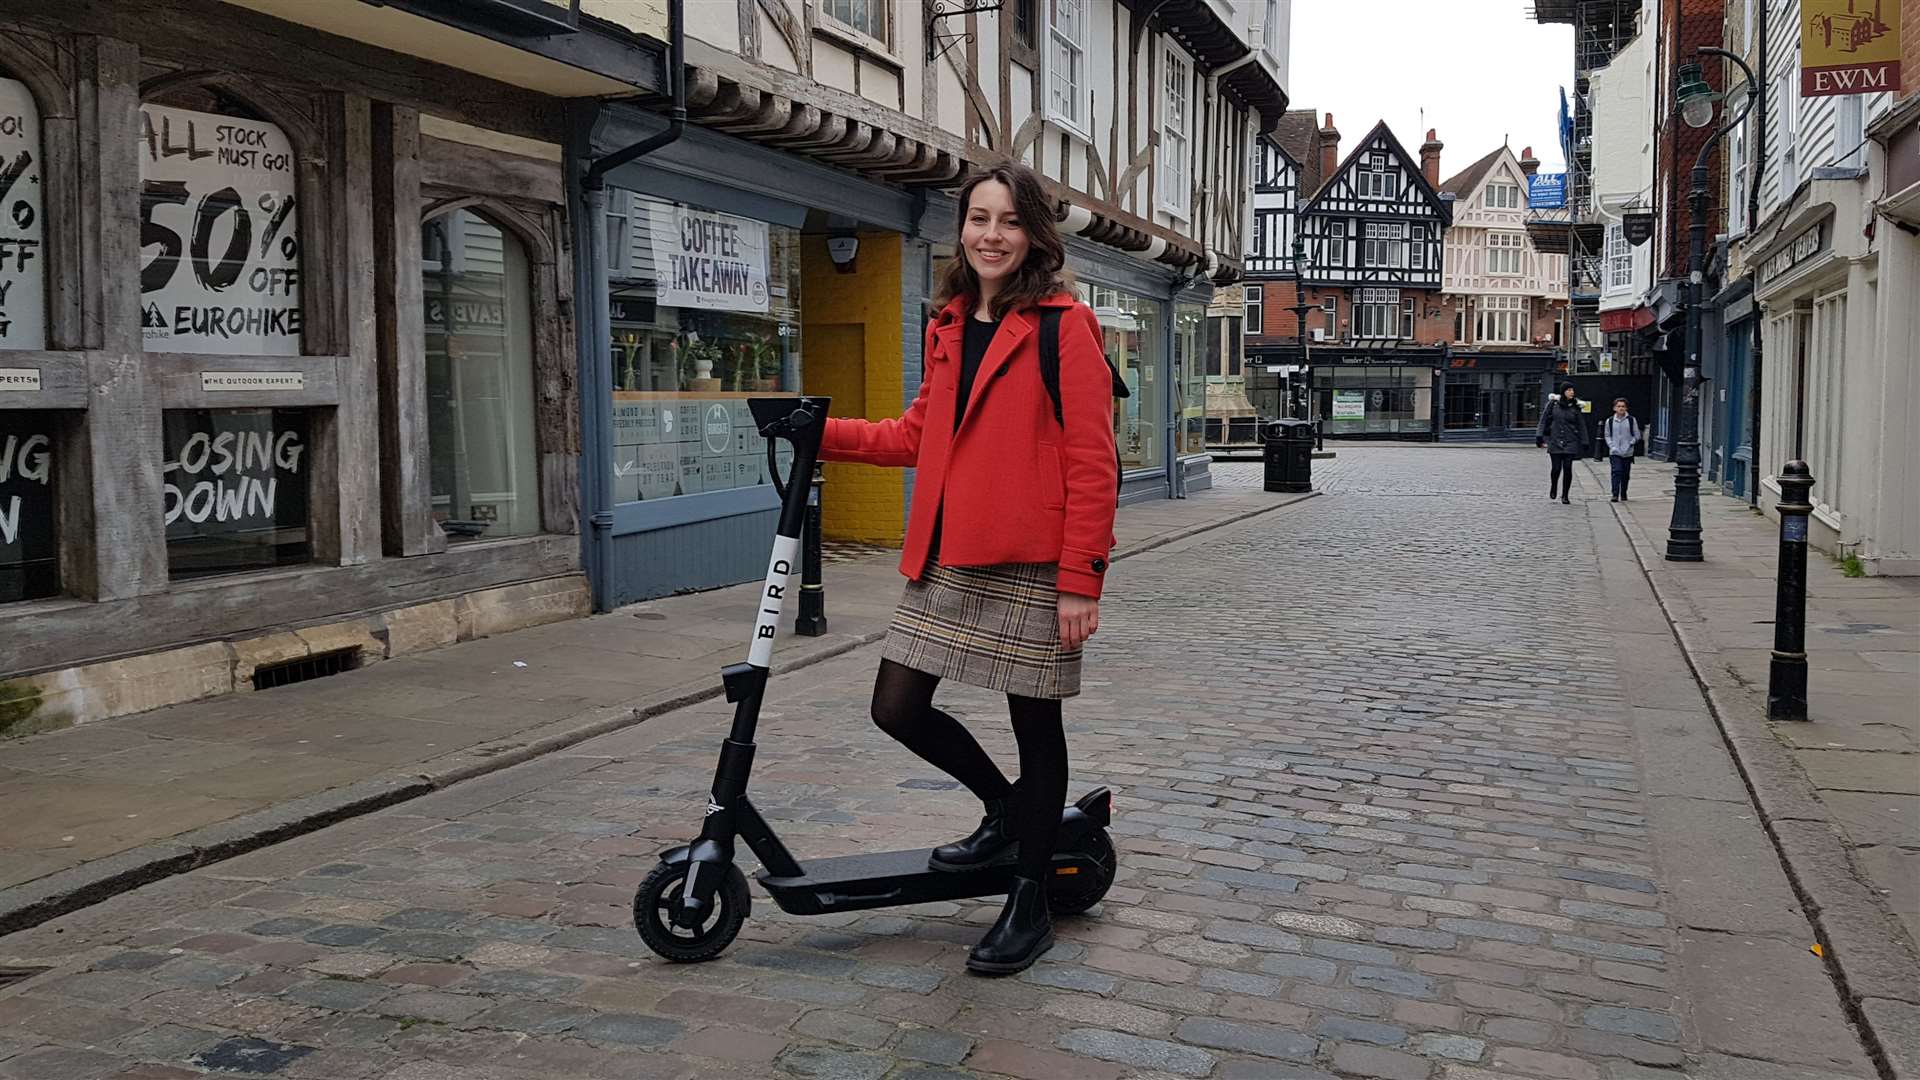 Reporter Lydia Chantler-Hicks previously tried out an e-scooter in Canterbury